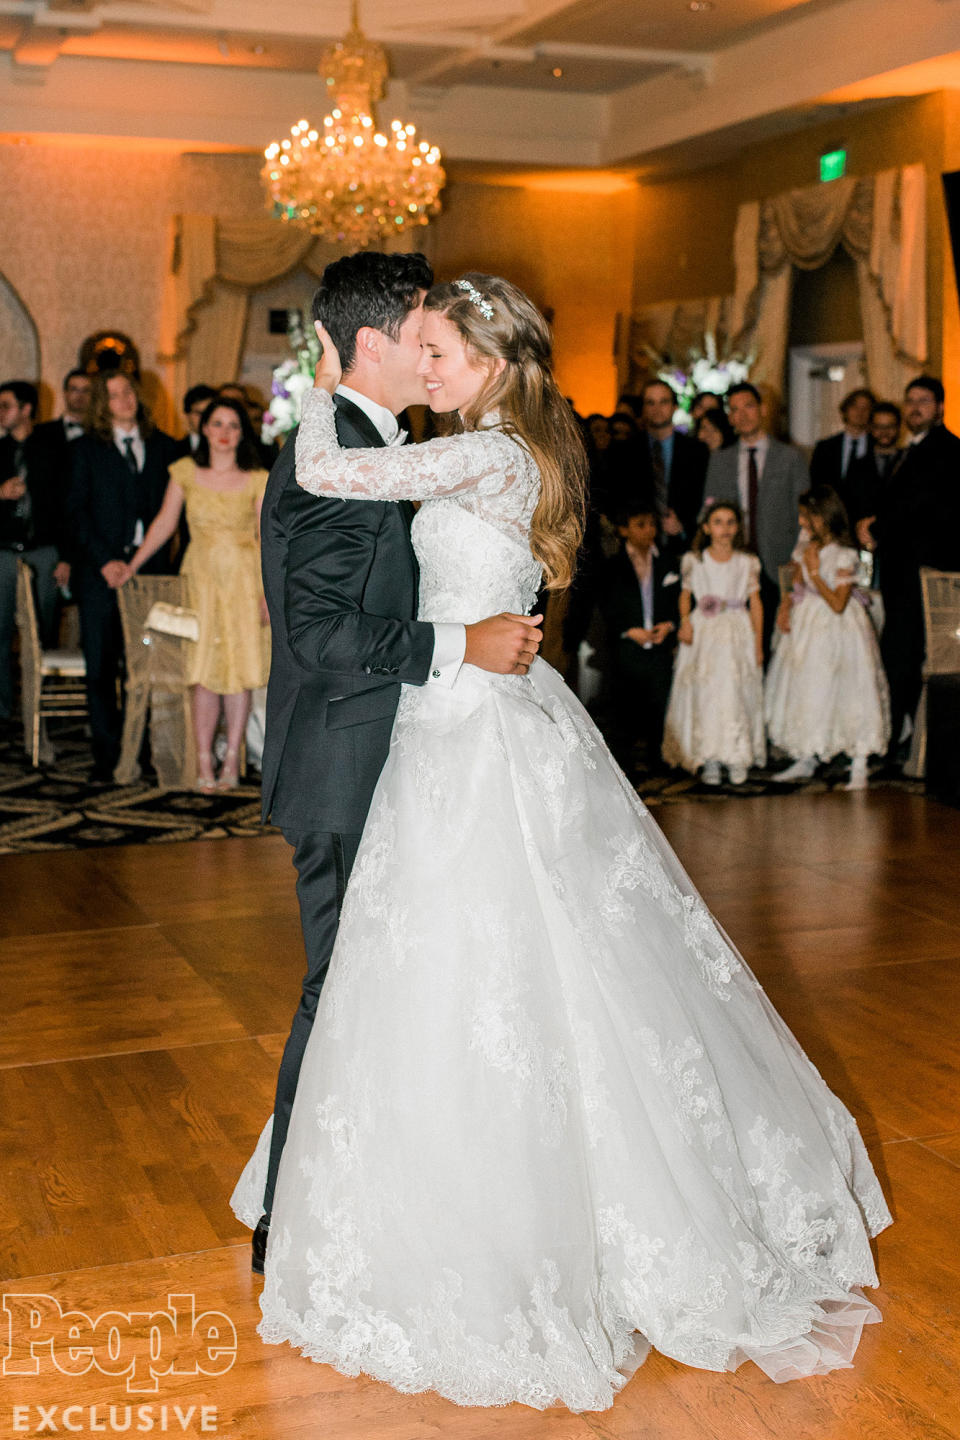 <p>The newlyweds shared their first dance to Michael Bublé's "Hold On" before breaking it down on the dance floor with their loved ones. "It'll be a Cahill Irish dance on the dance floor," said Cahill.</p>